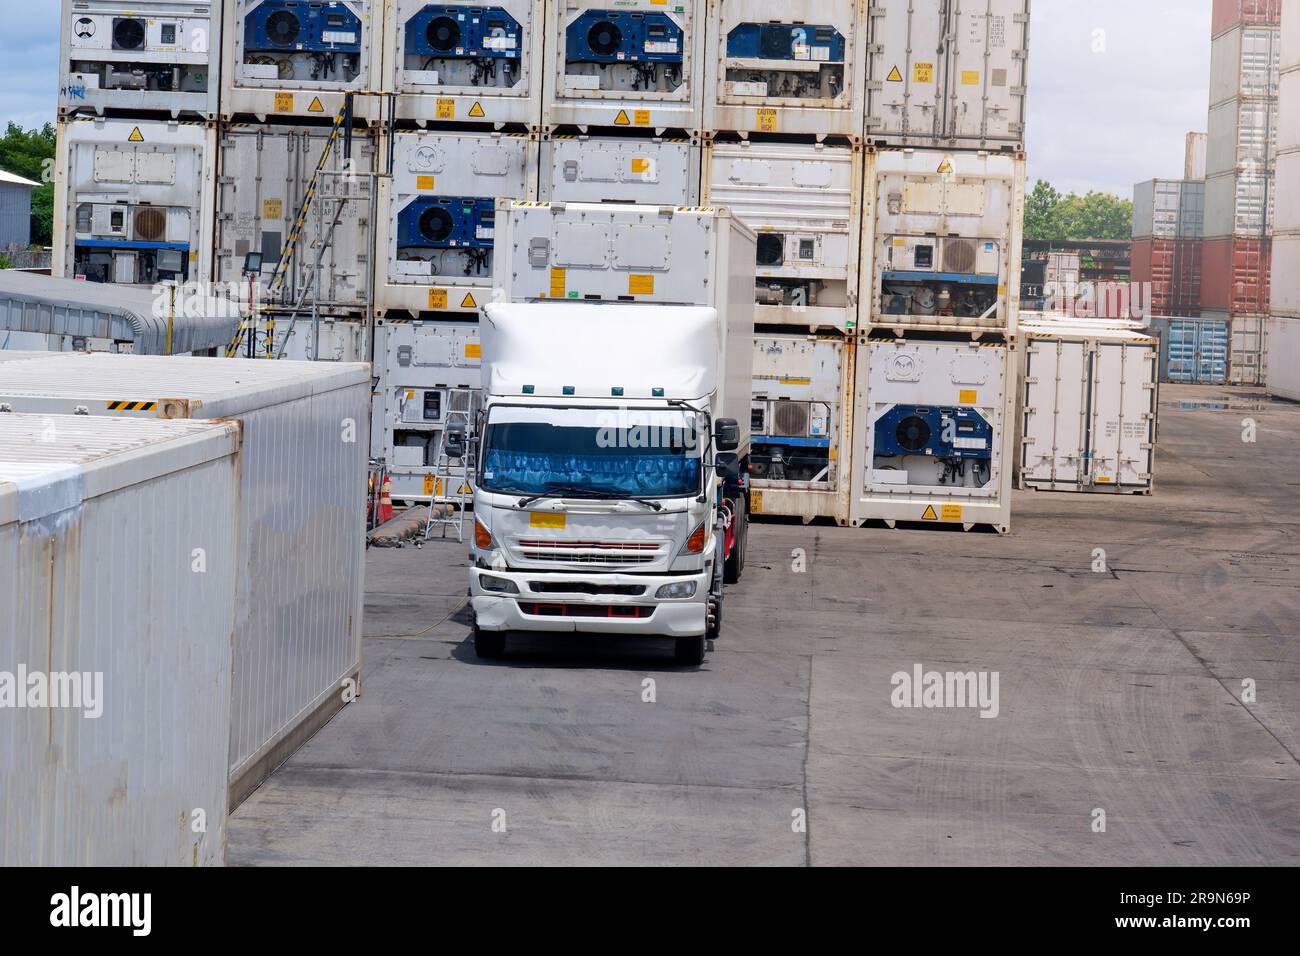 trucks in refrigerated container areas Stock Photo